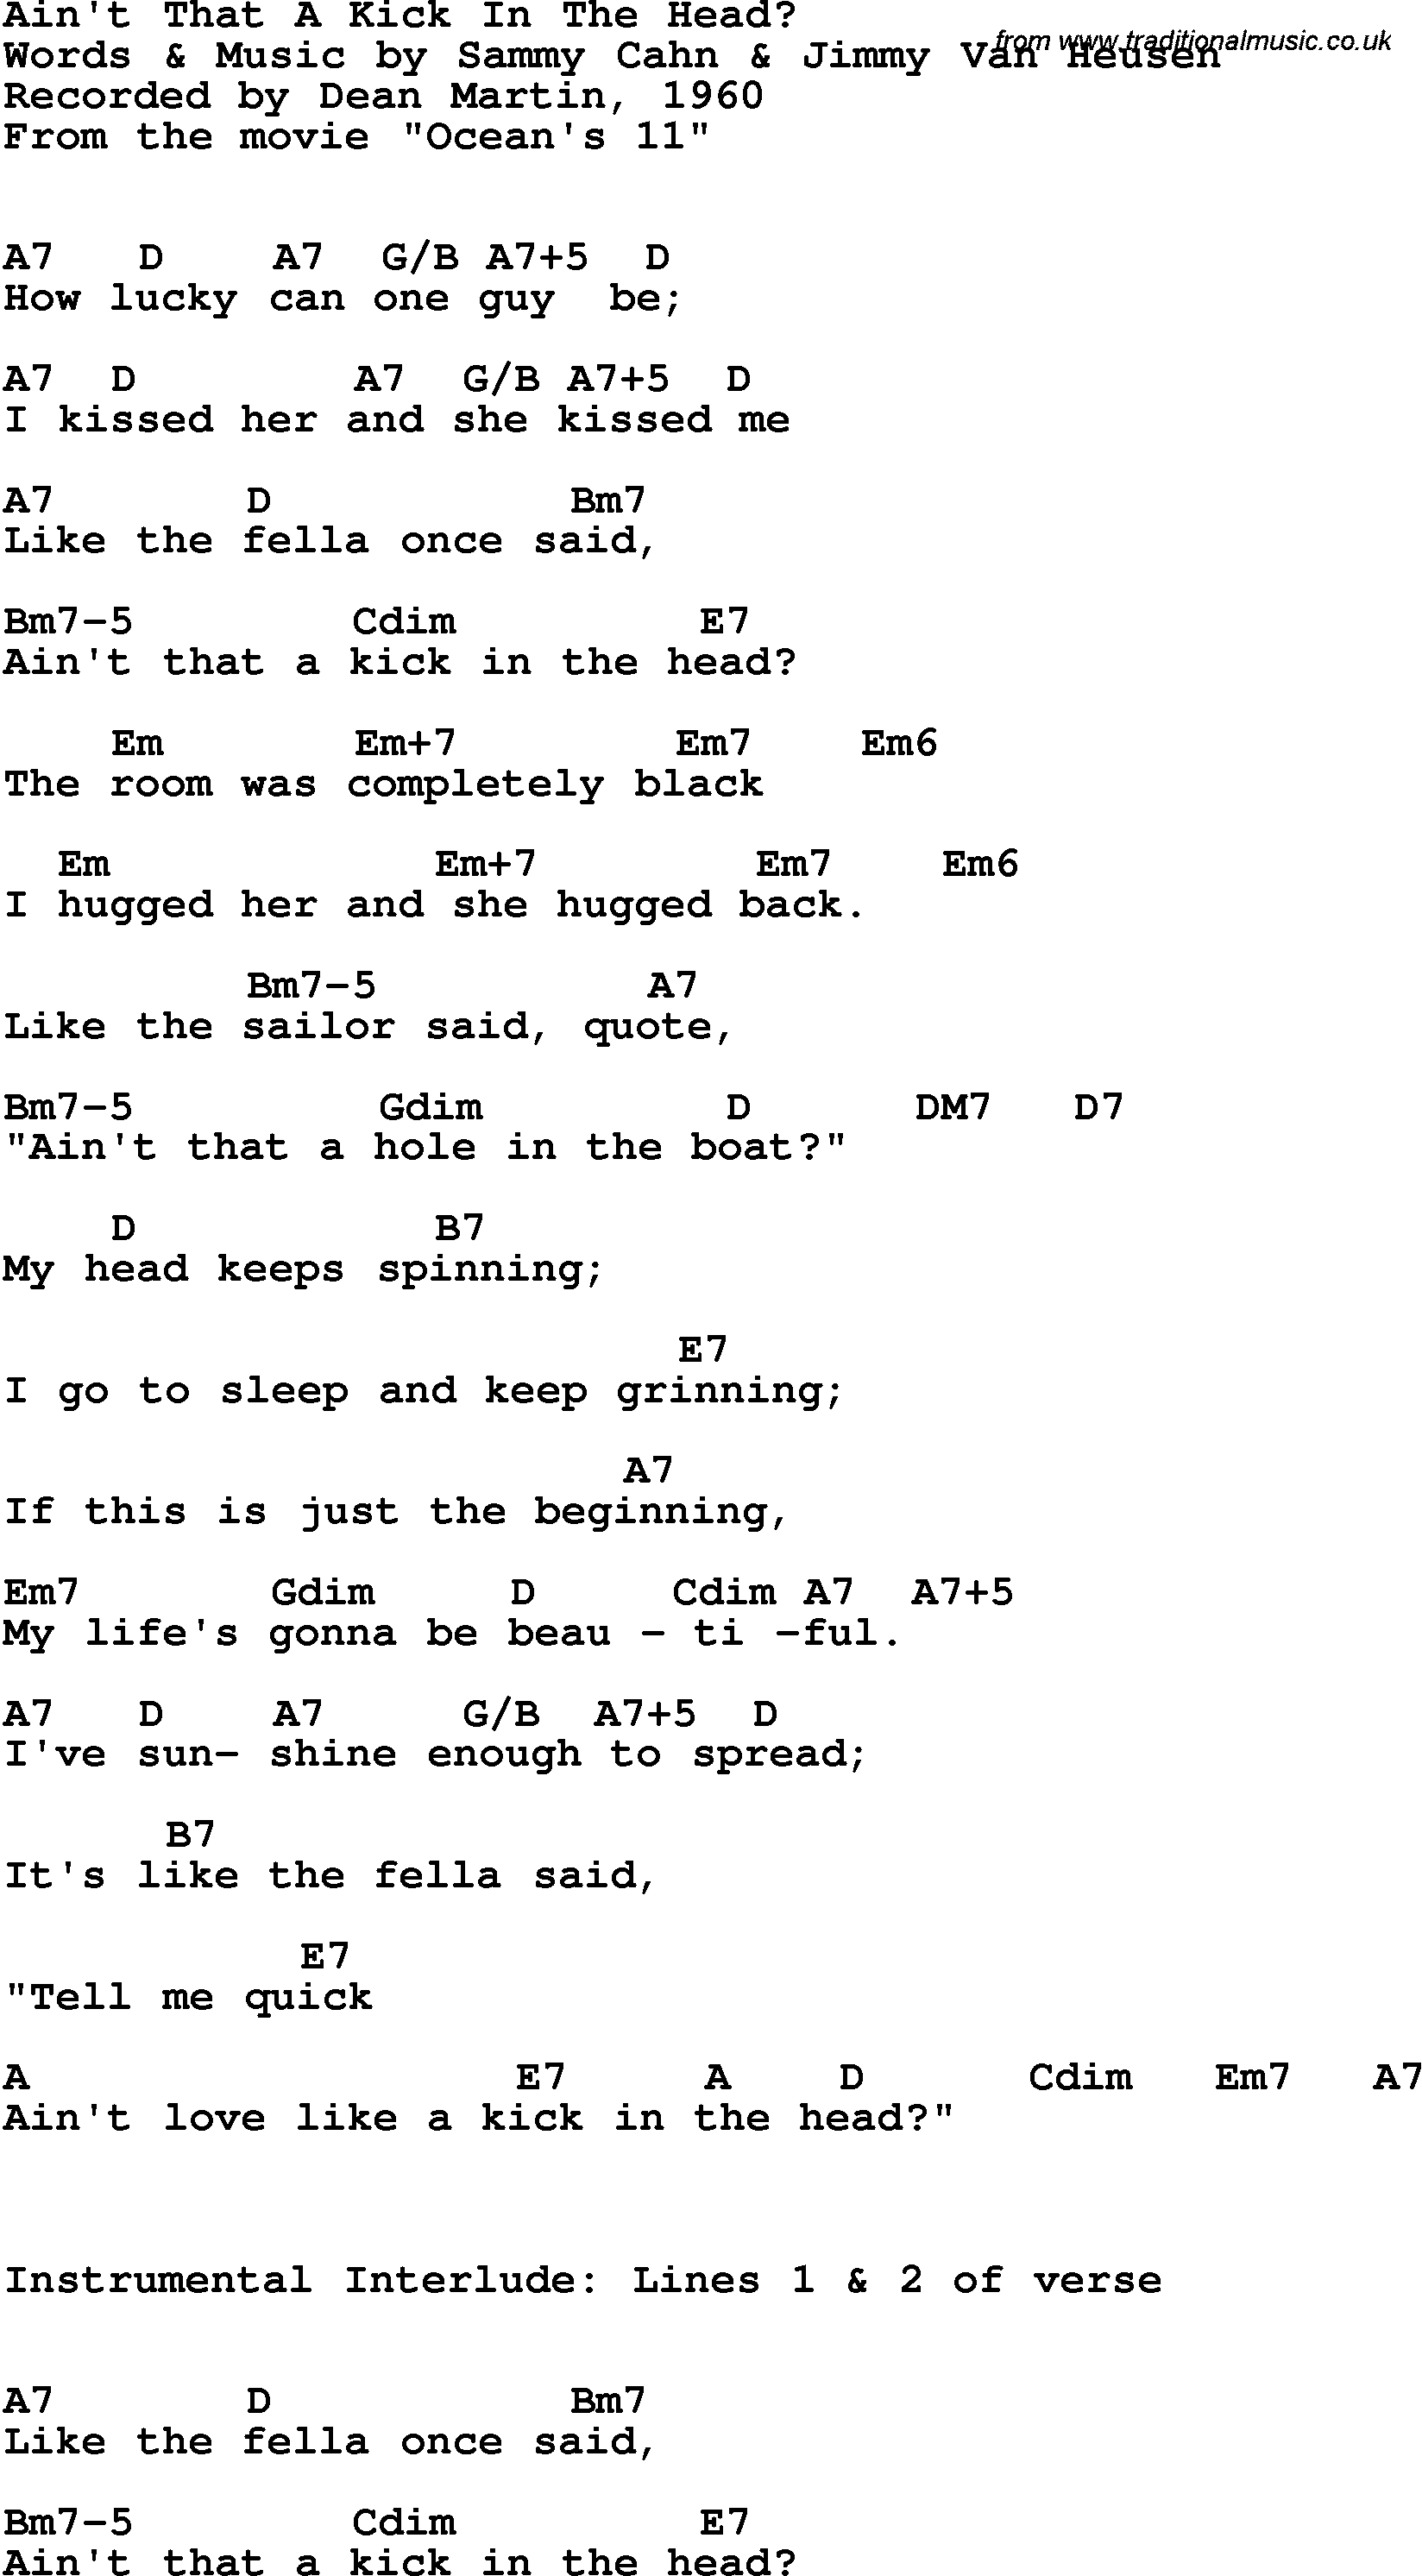 Song Lyrics with guitar chords for Ain't That A Kick In The Head - Dean Martin, 1960